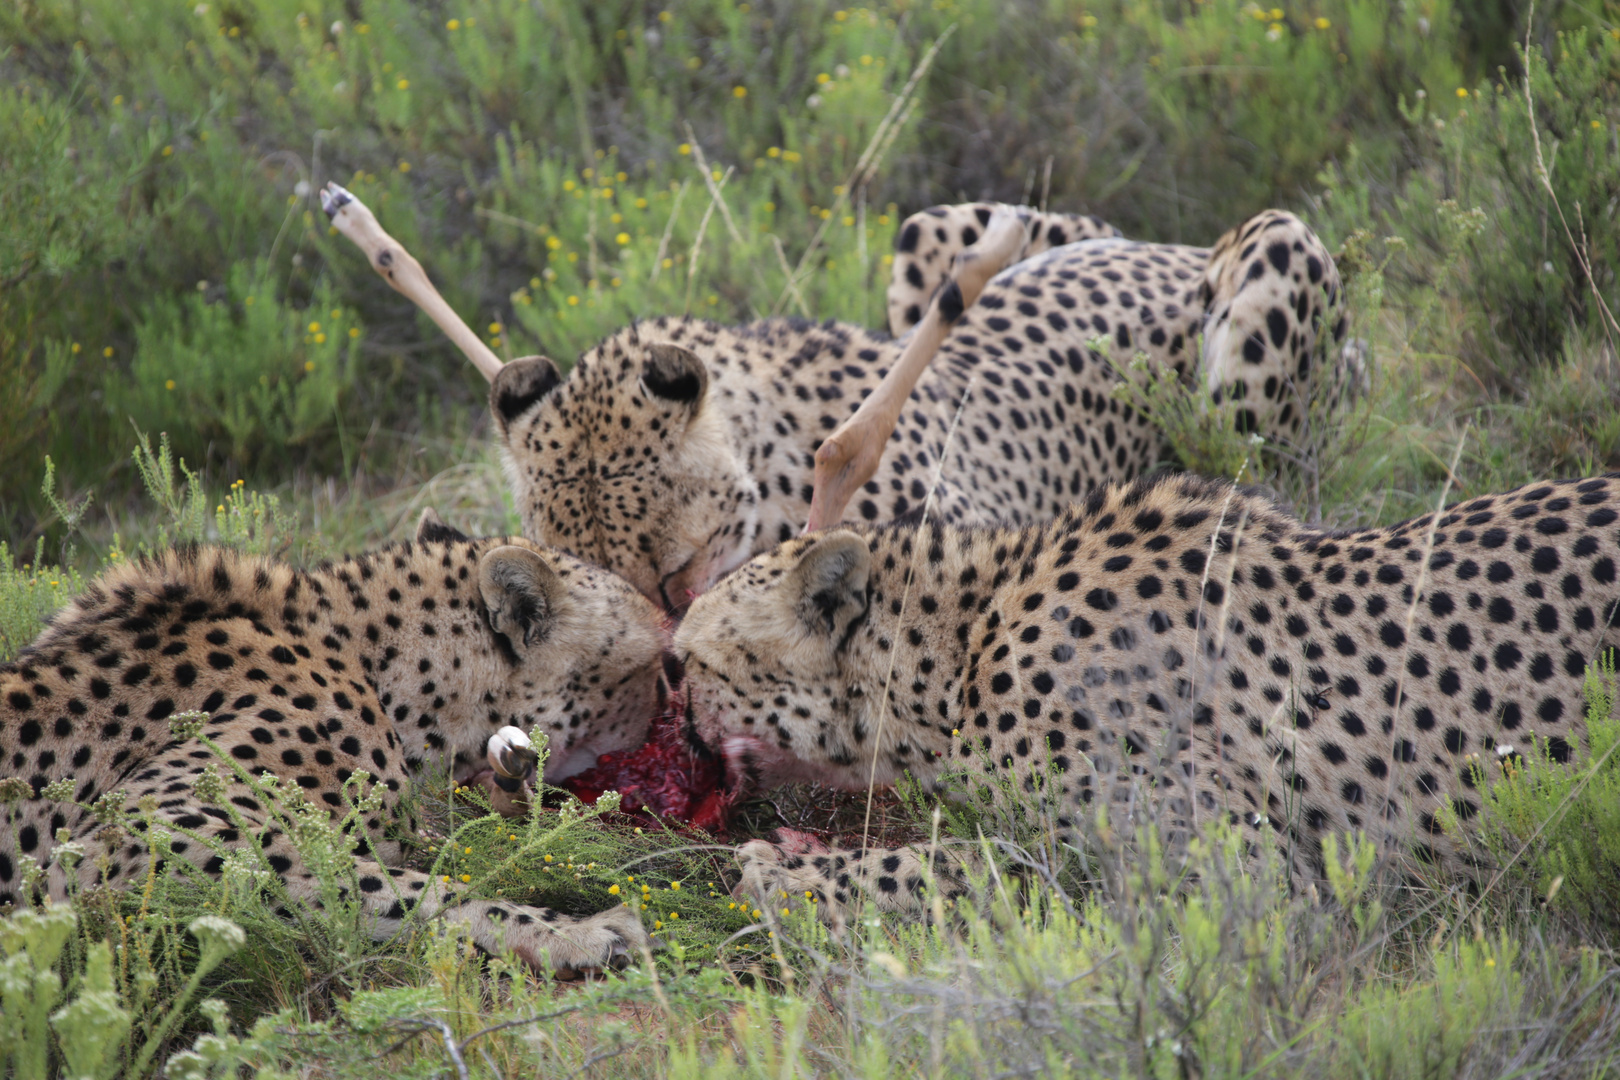 Lunchtime for the Cheetahs